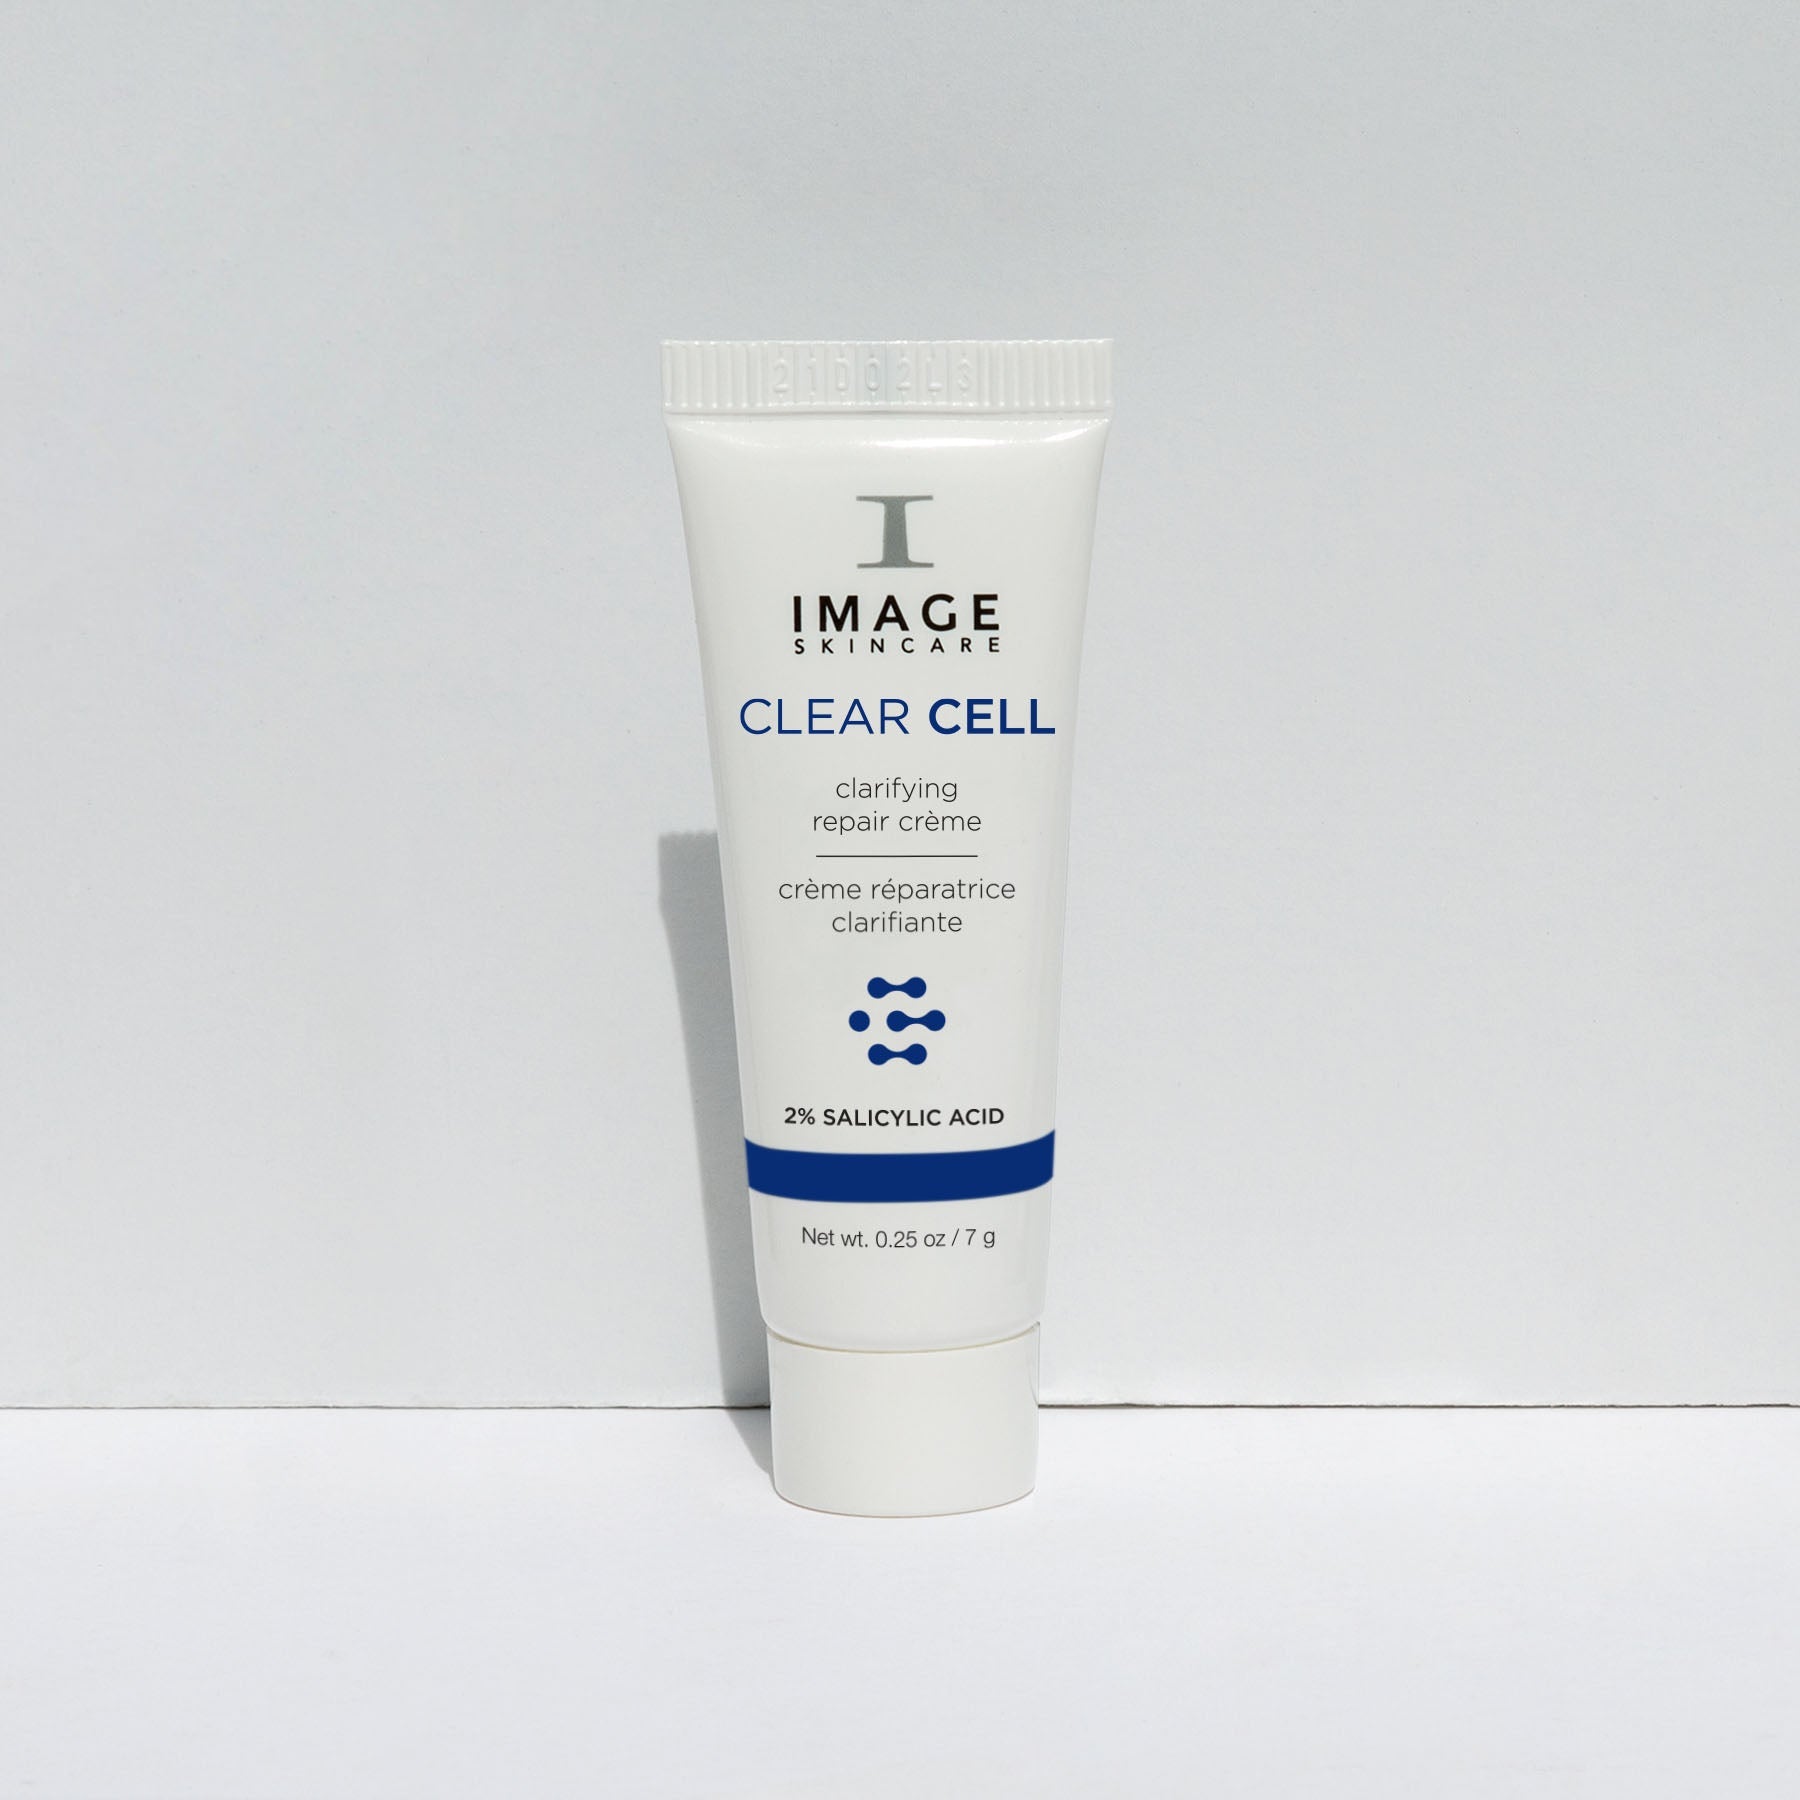 » Clear Cell clarifying repair creme sample (50% off)